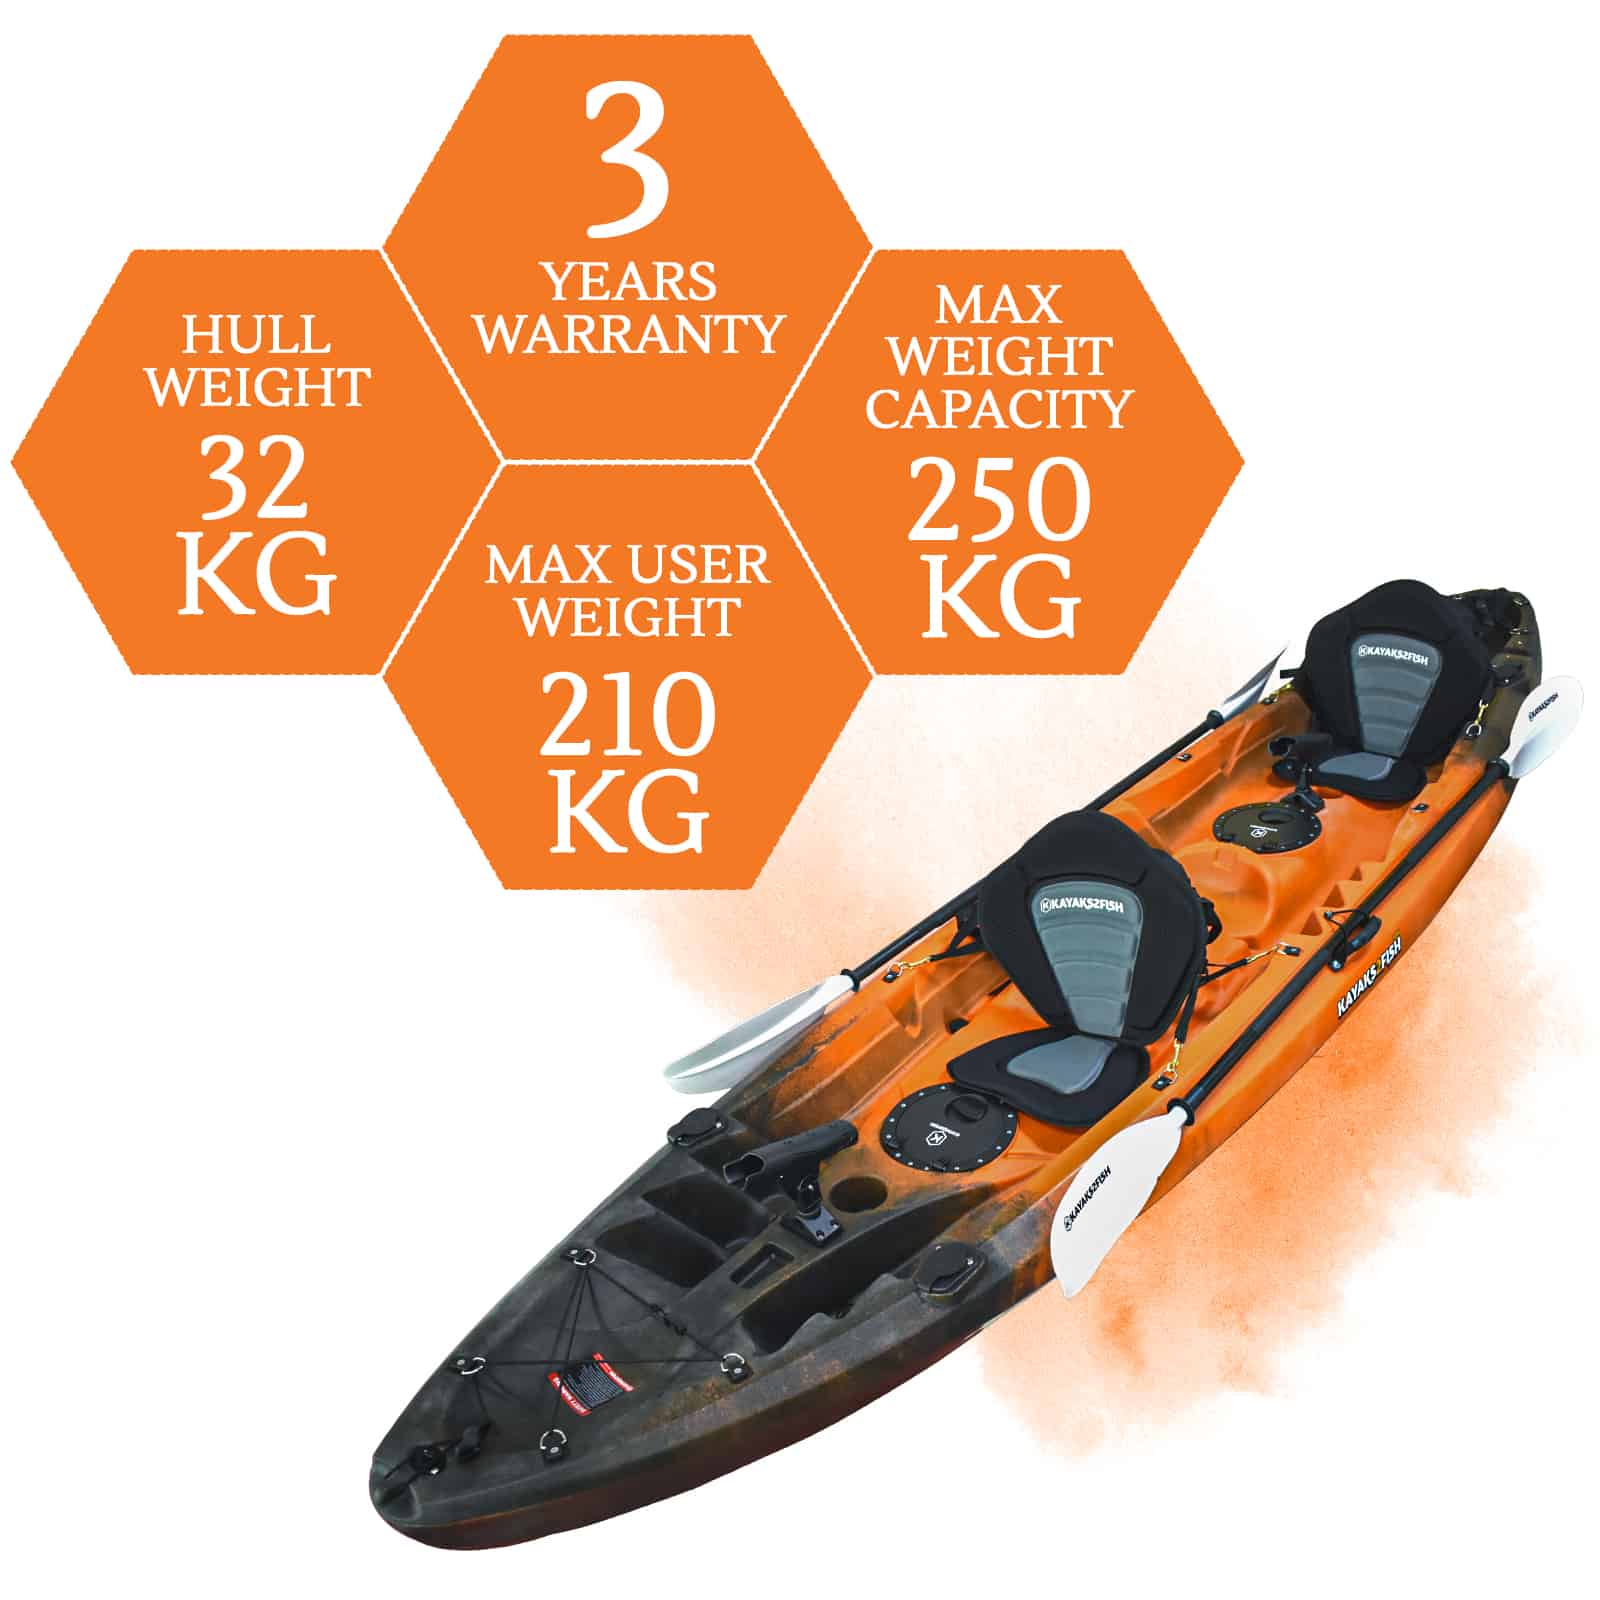 K2FB-EAGLE-SUNSET specifications